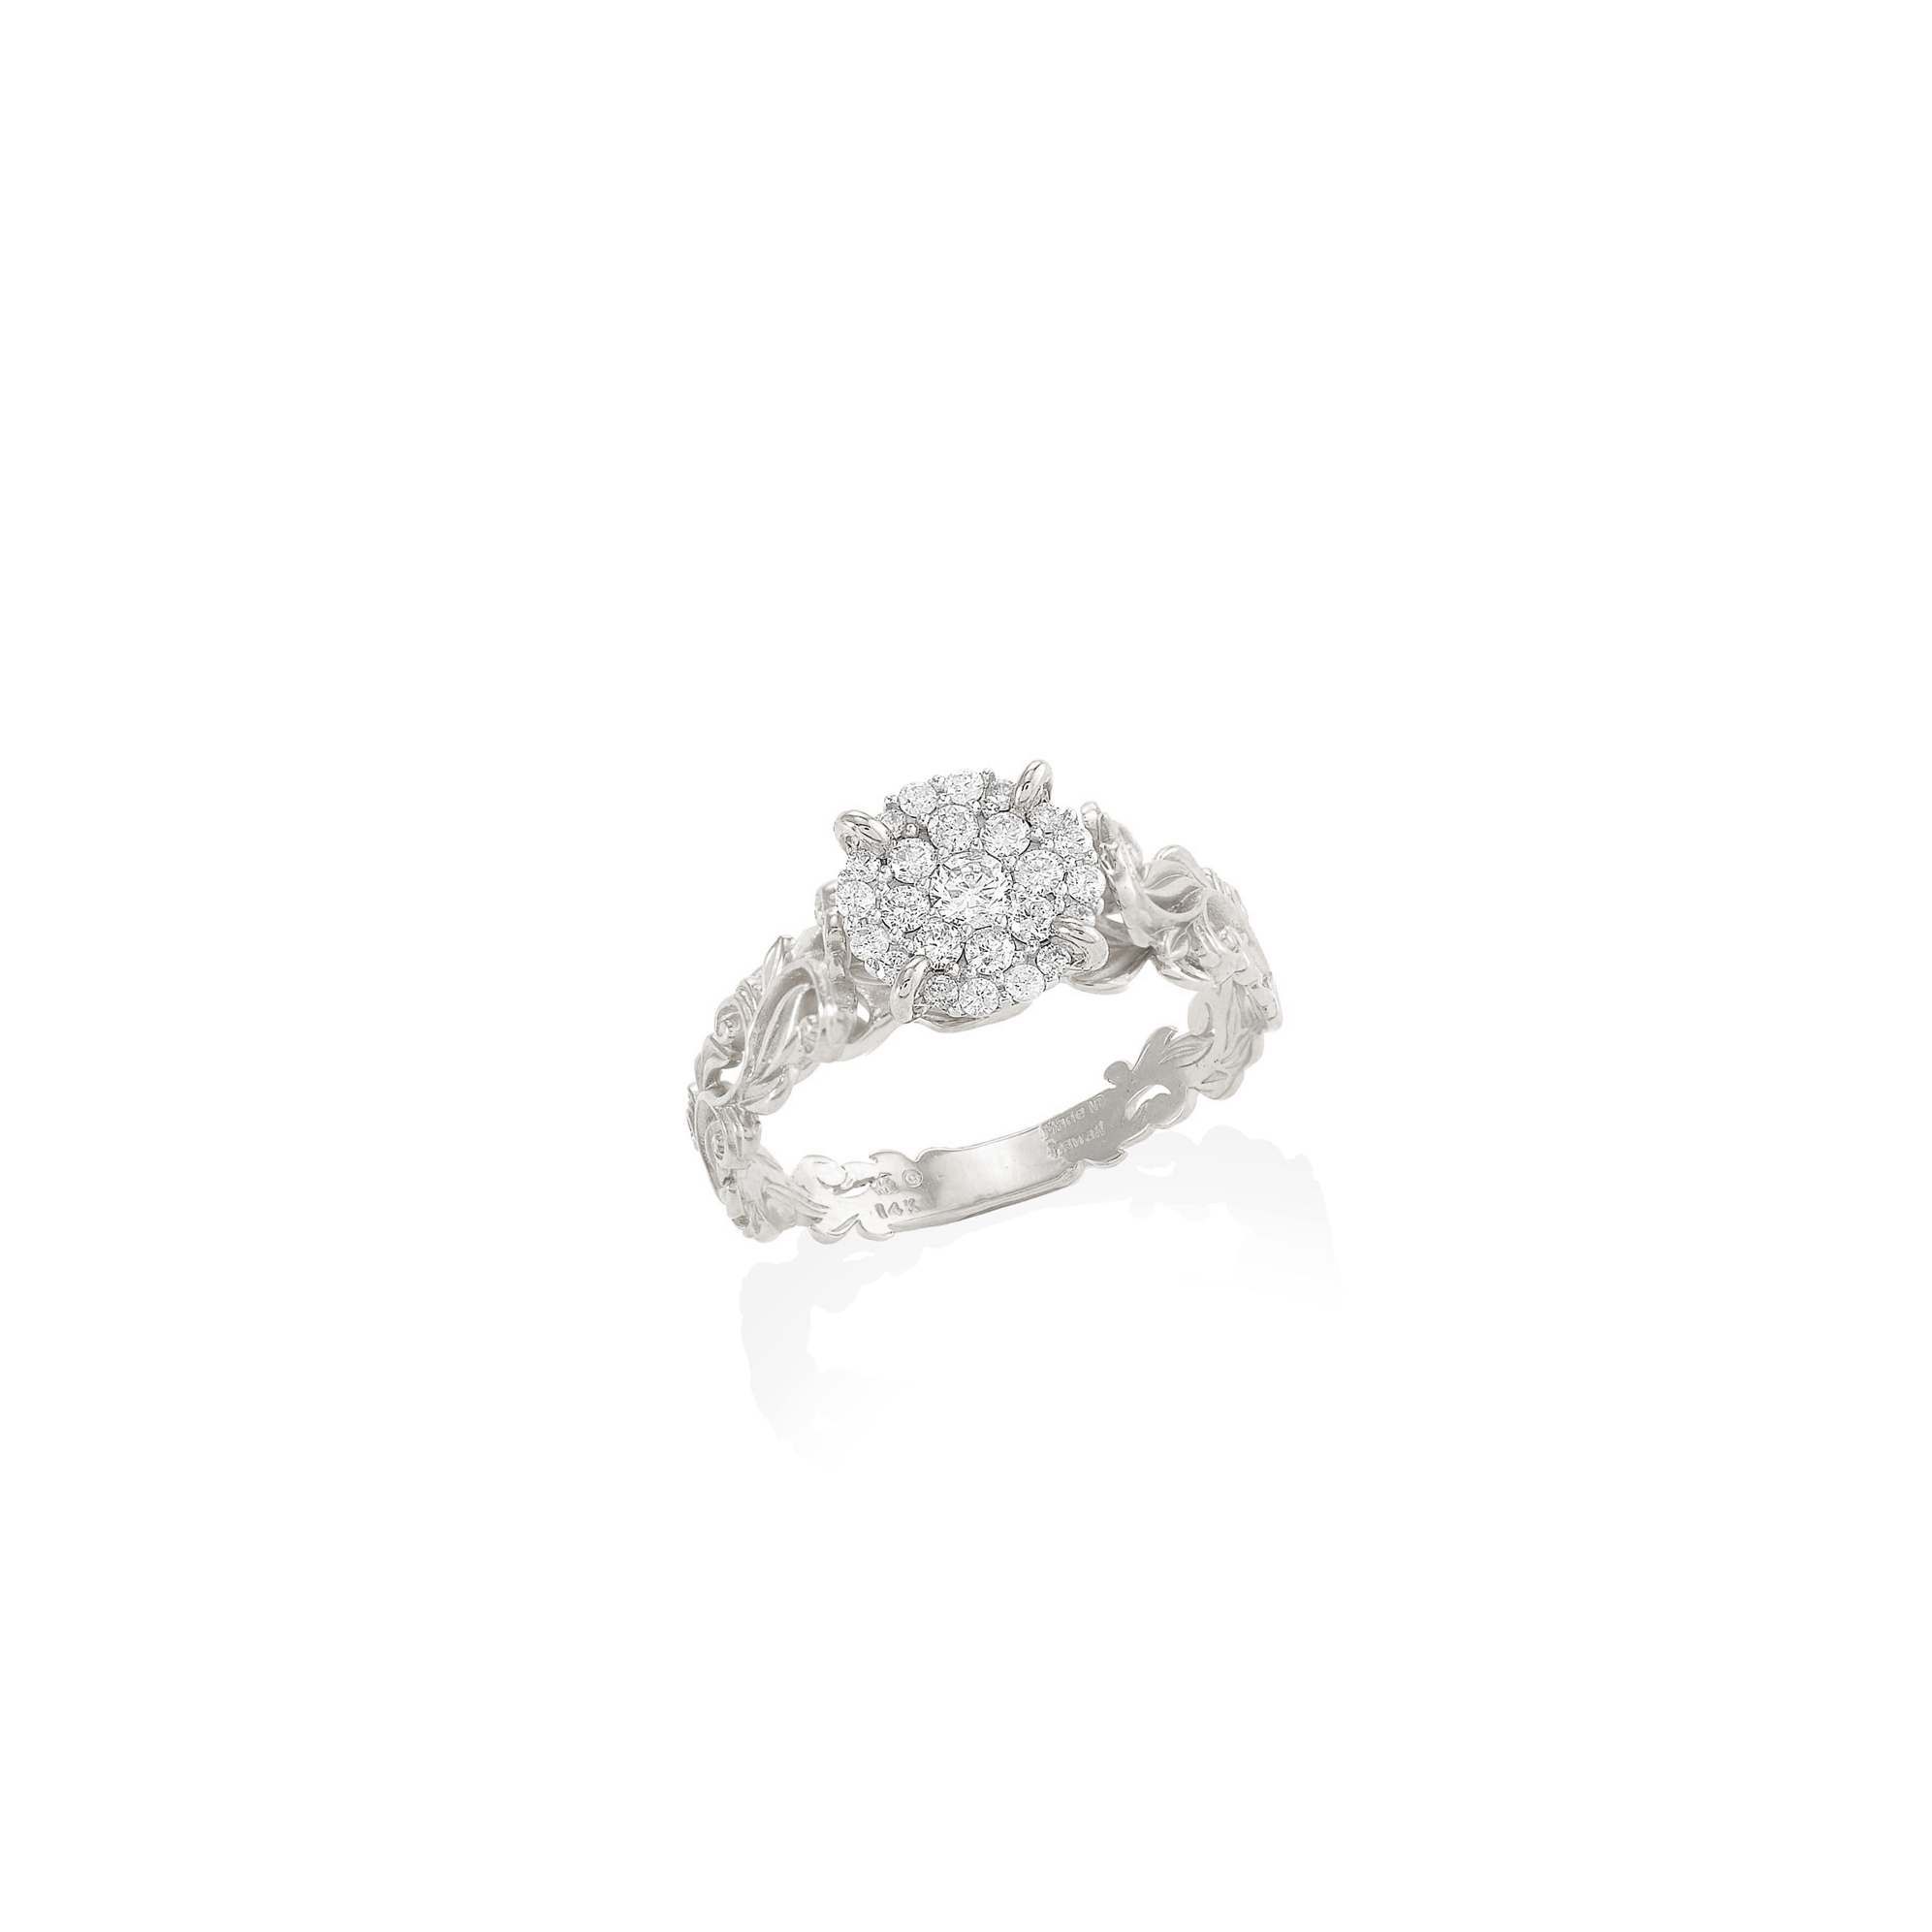 Living Heirloom Engagement Ring in White Gold with Diamonds